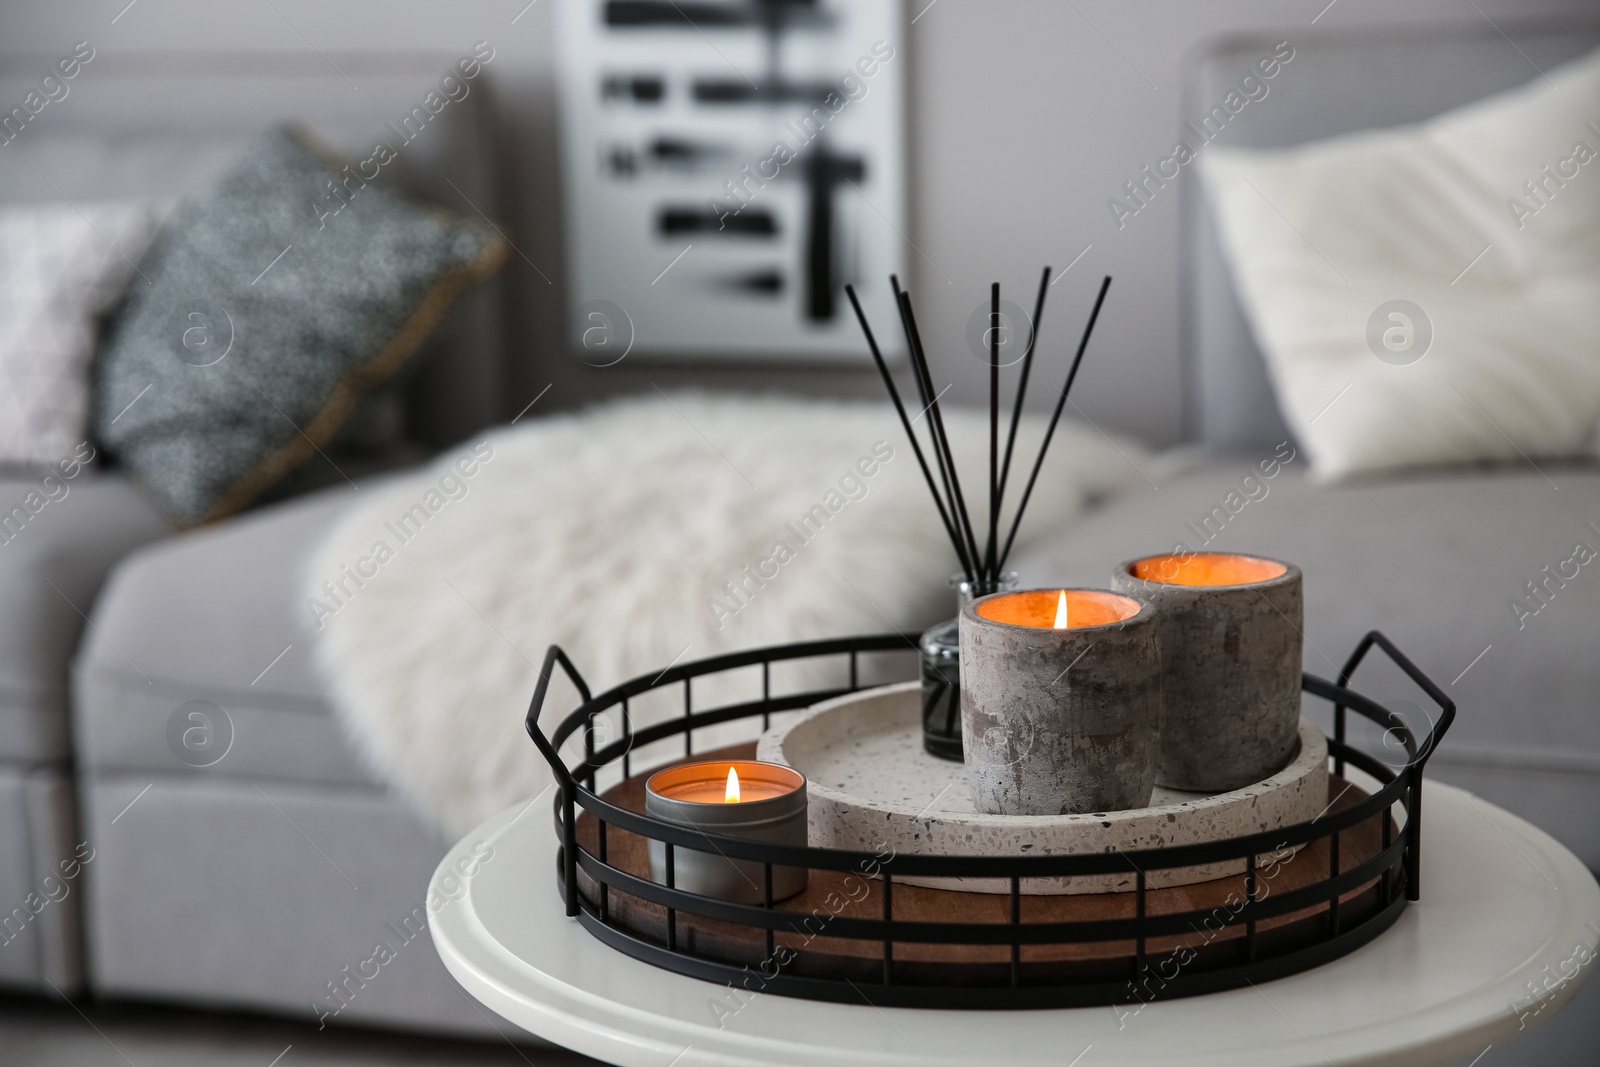 Photo of Candles and aroma reed diffuser on white table near grey sofa